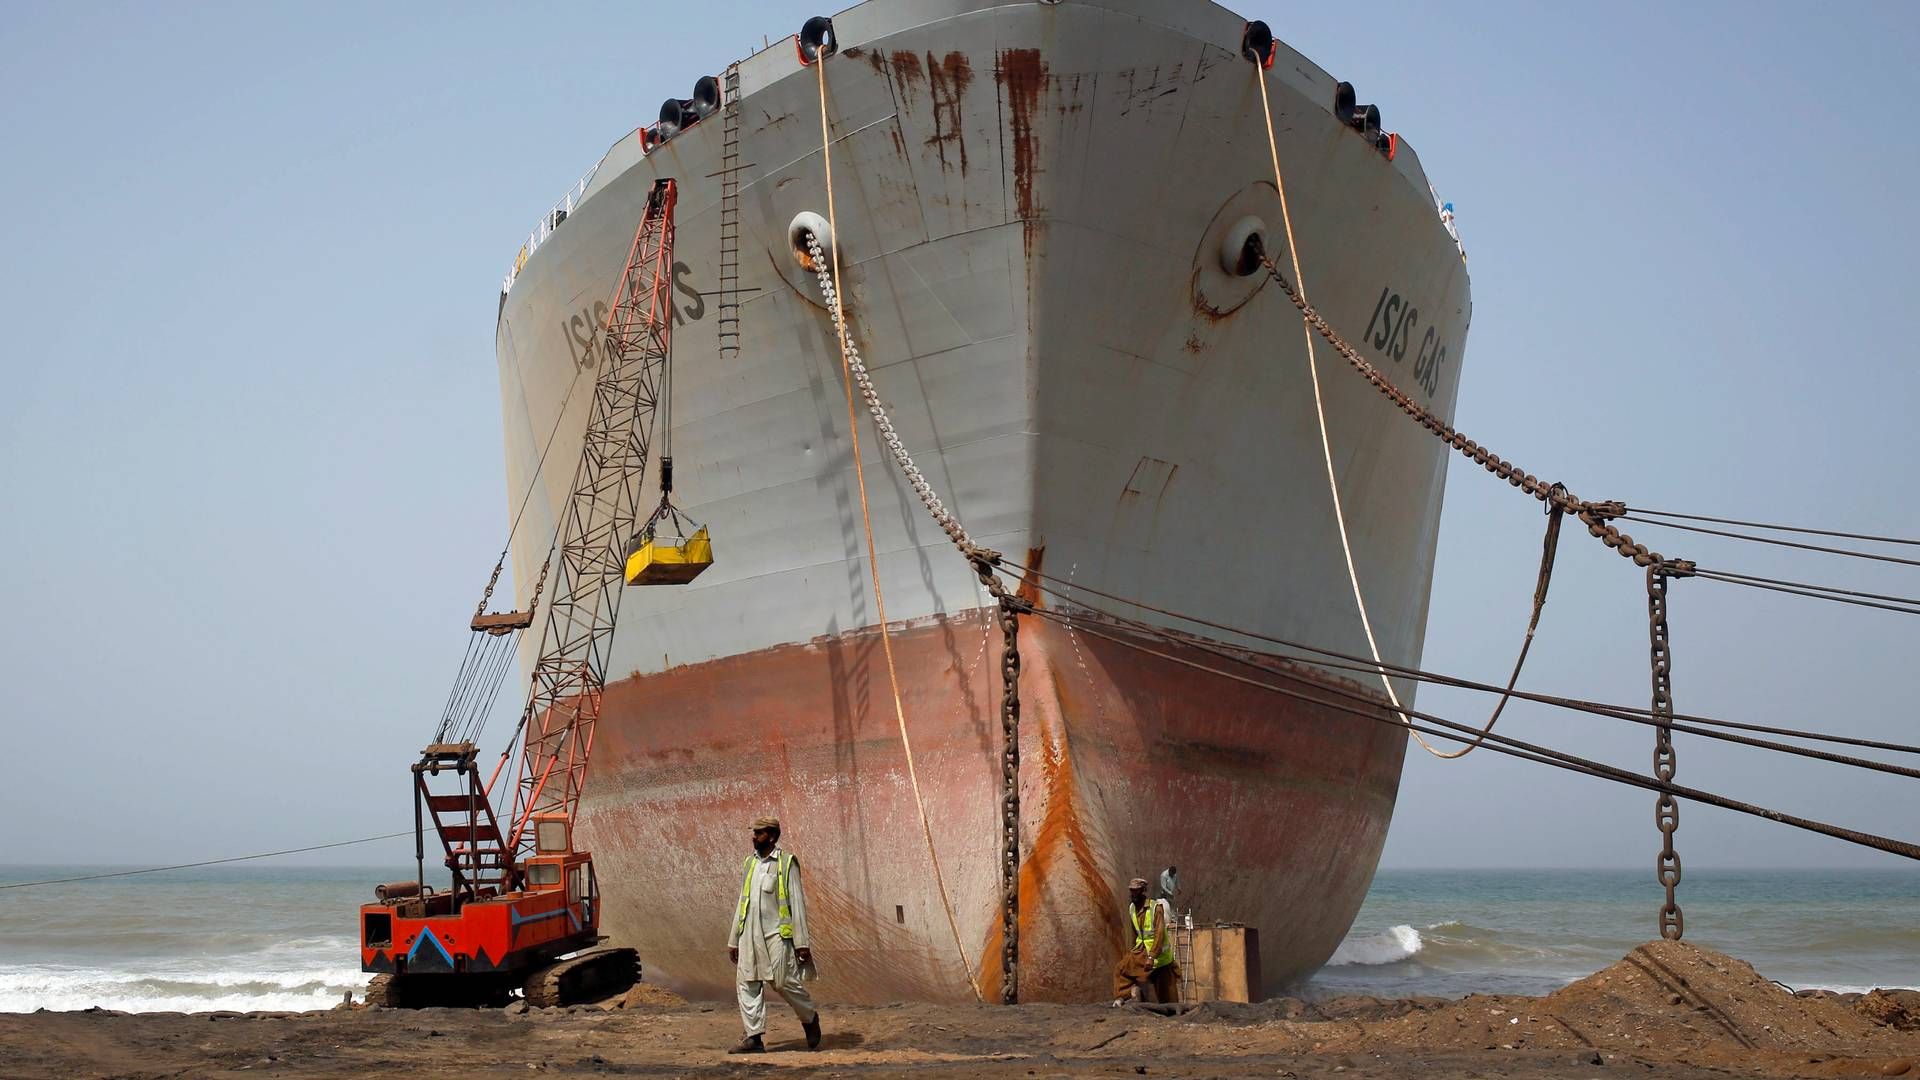 85% of ships sent to scrapping end up on beaches in India, Pakistan and Bangladesh. | Photo: Akhtar Soomro/Reuters/Ritzau Scanpix